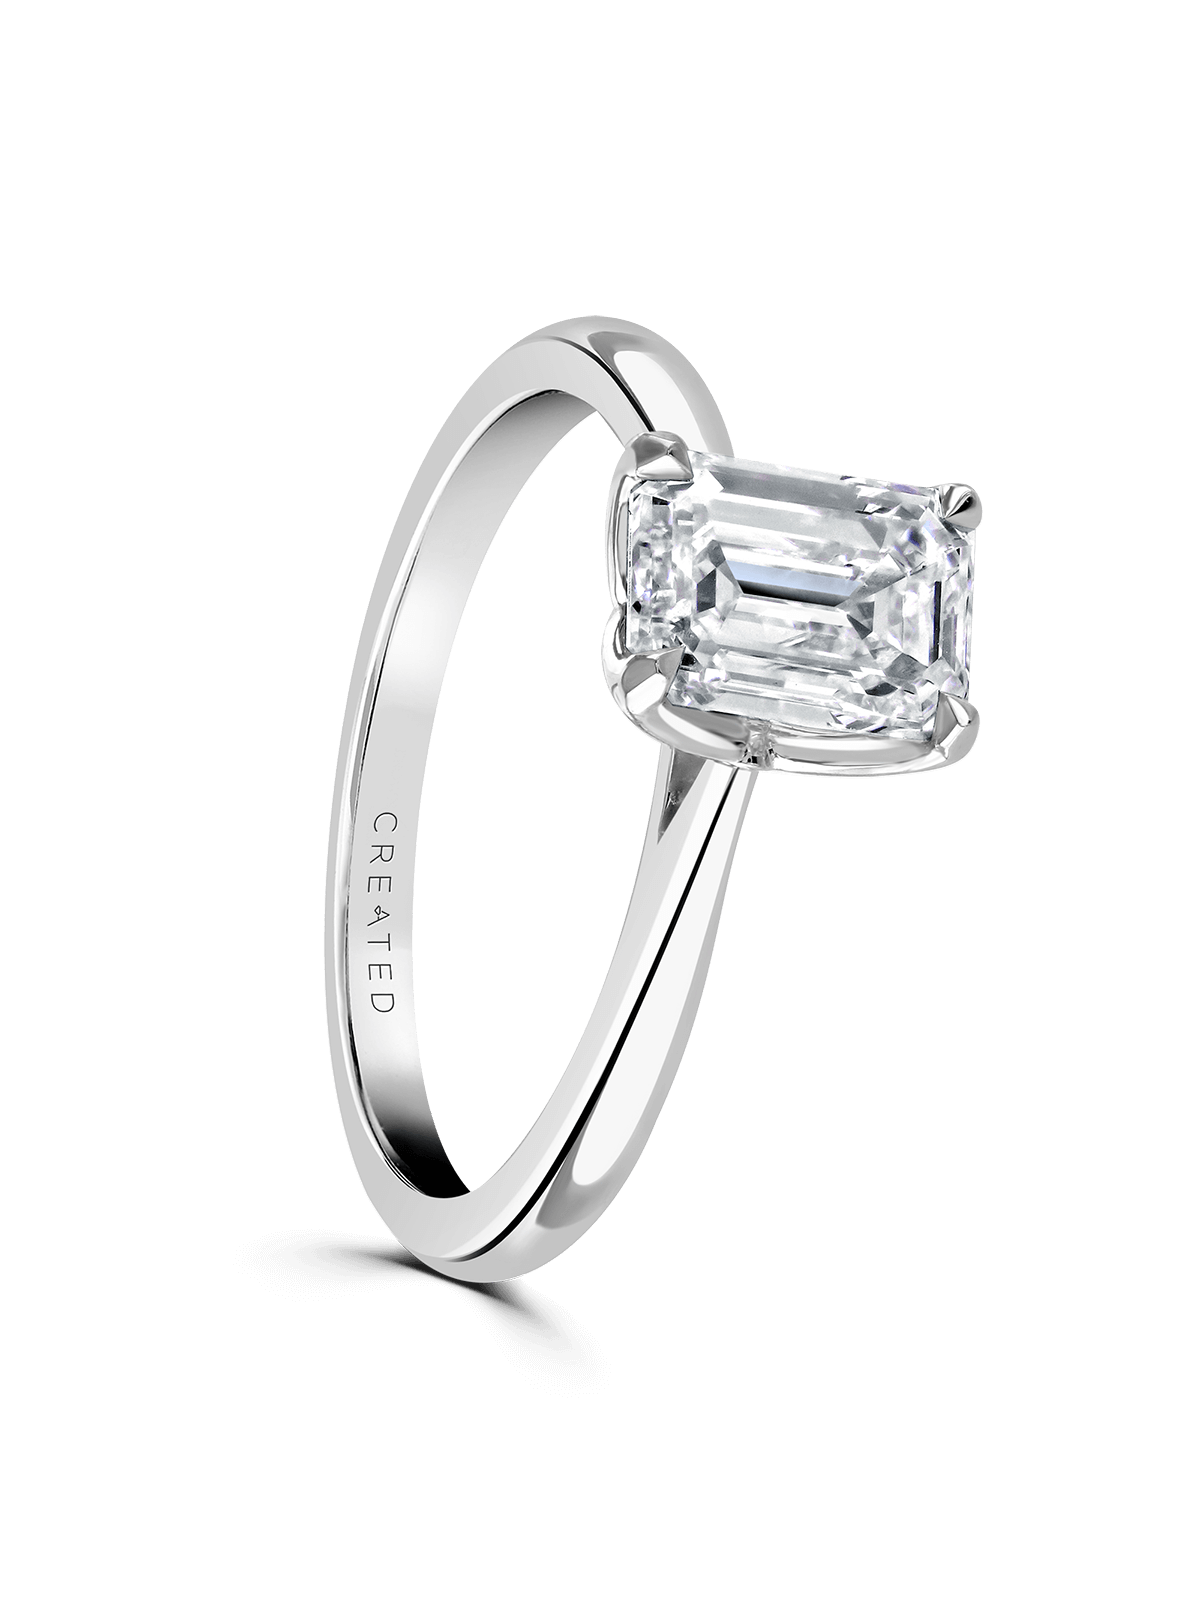 "Magnolia" Approx 1.50ct Emerald Cut Lab Grown Diamond Solitaire Engagement Ring in Platinum